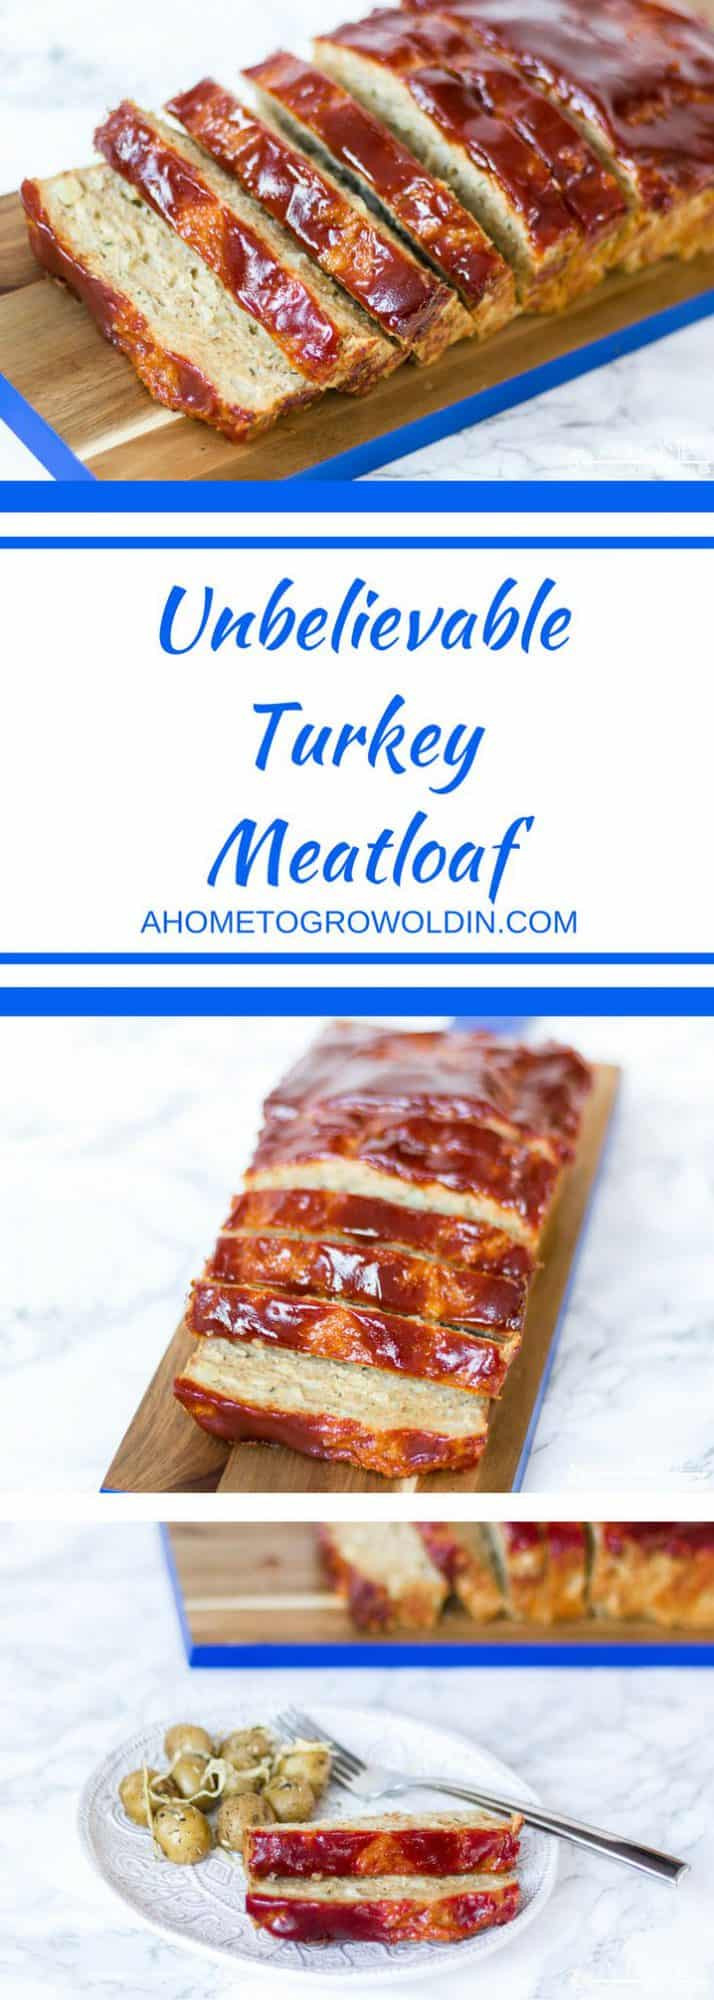 Simple Turkey Meatloaf Recipe
 Easy and Healthy Turkey Meatloaf Recipe A Home To Grow